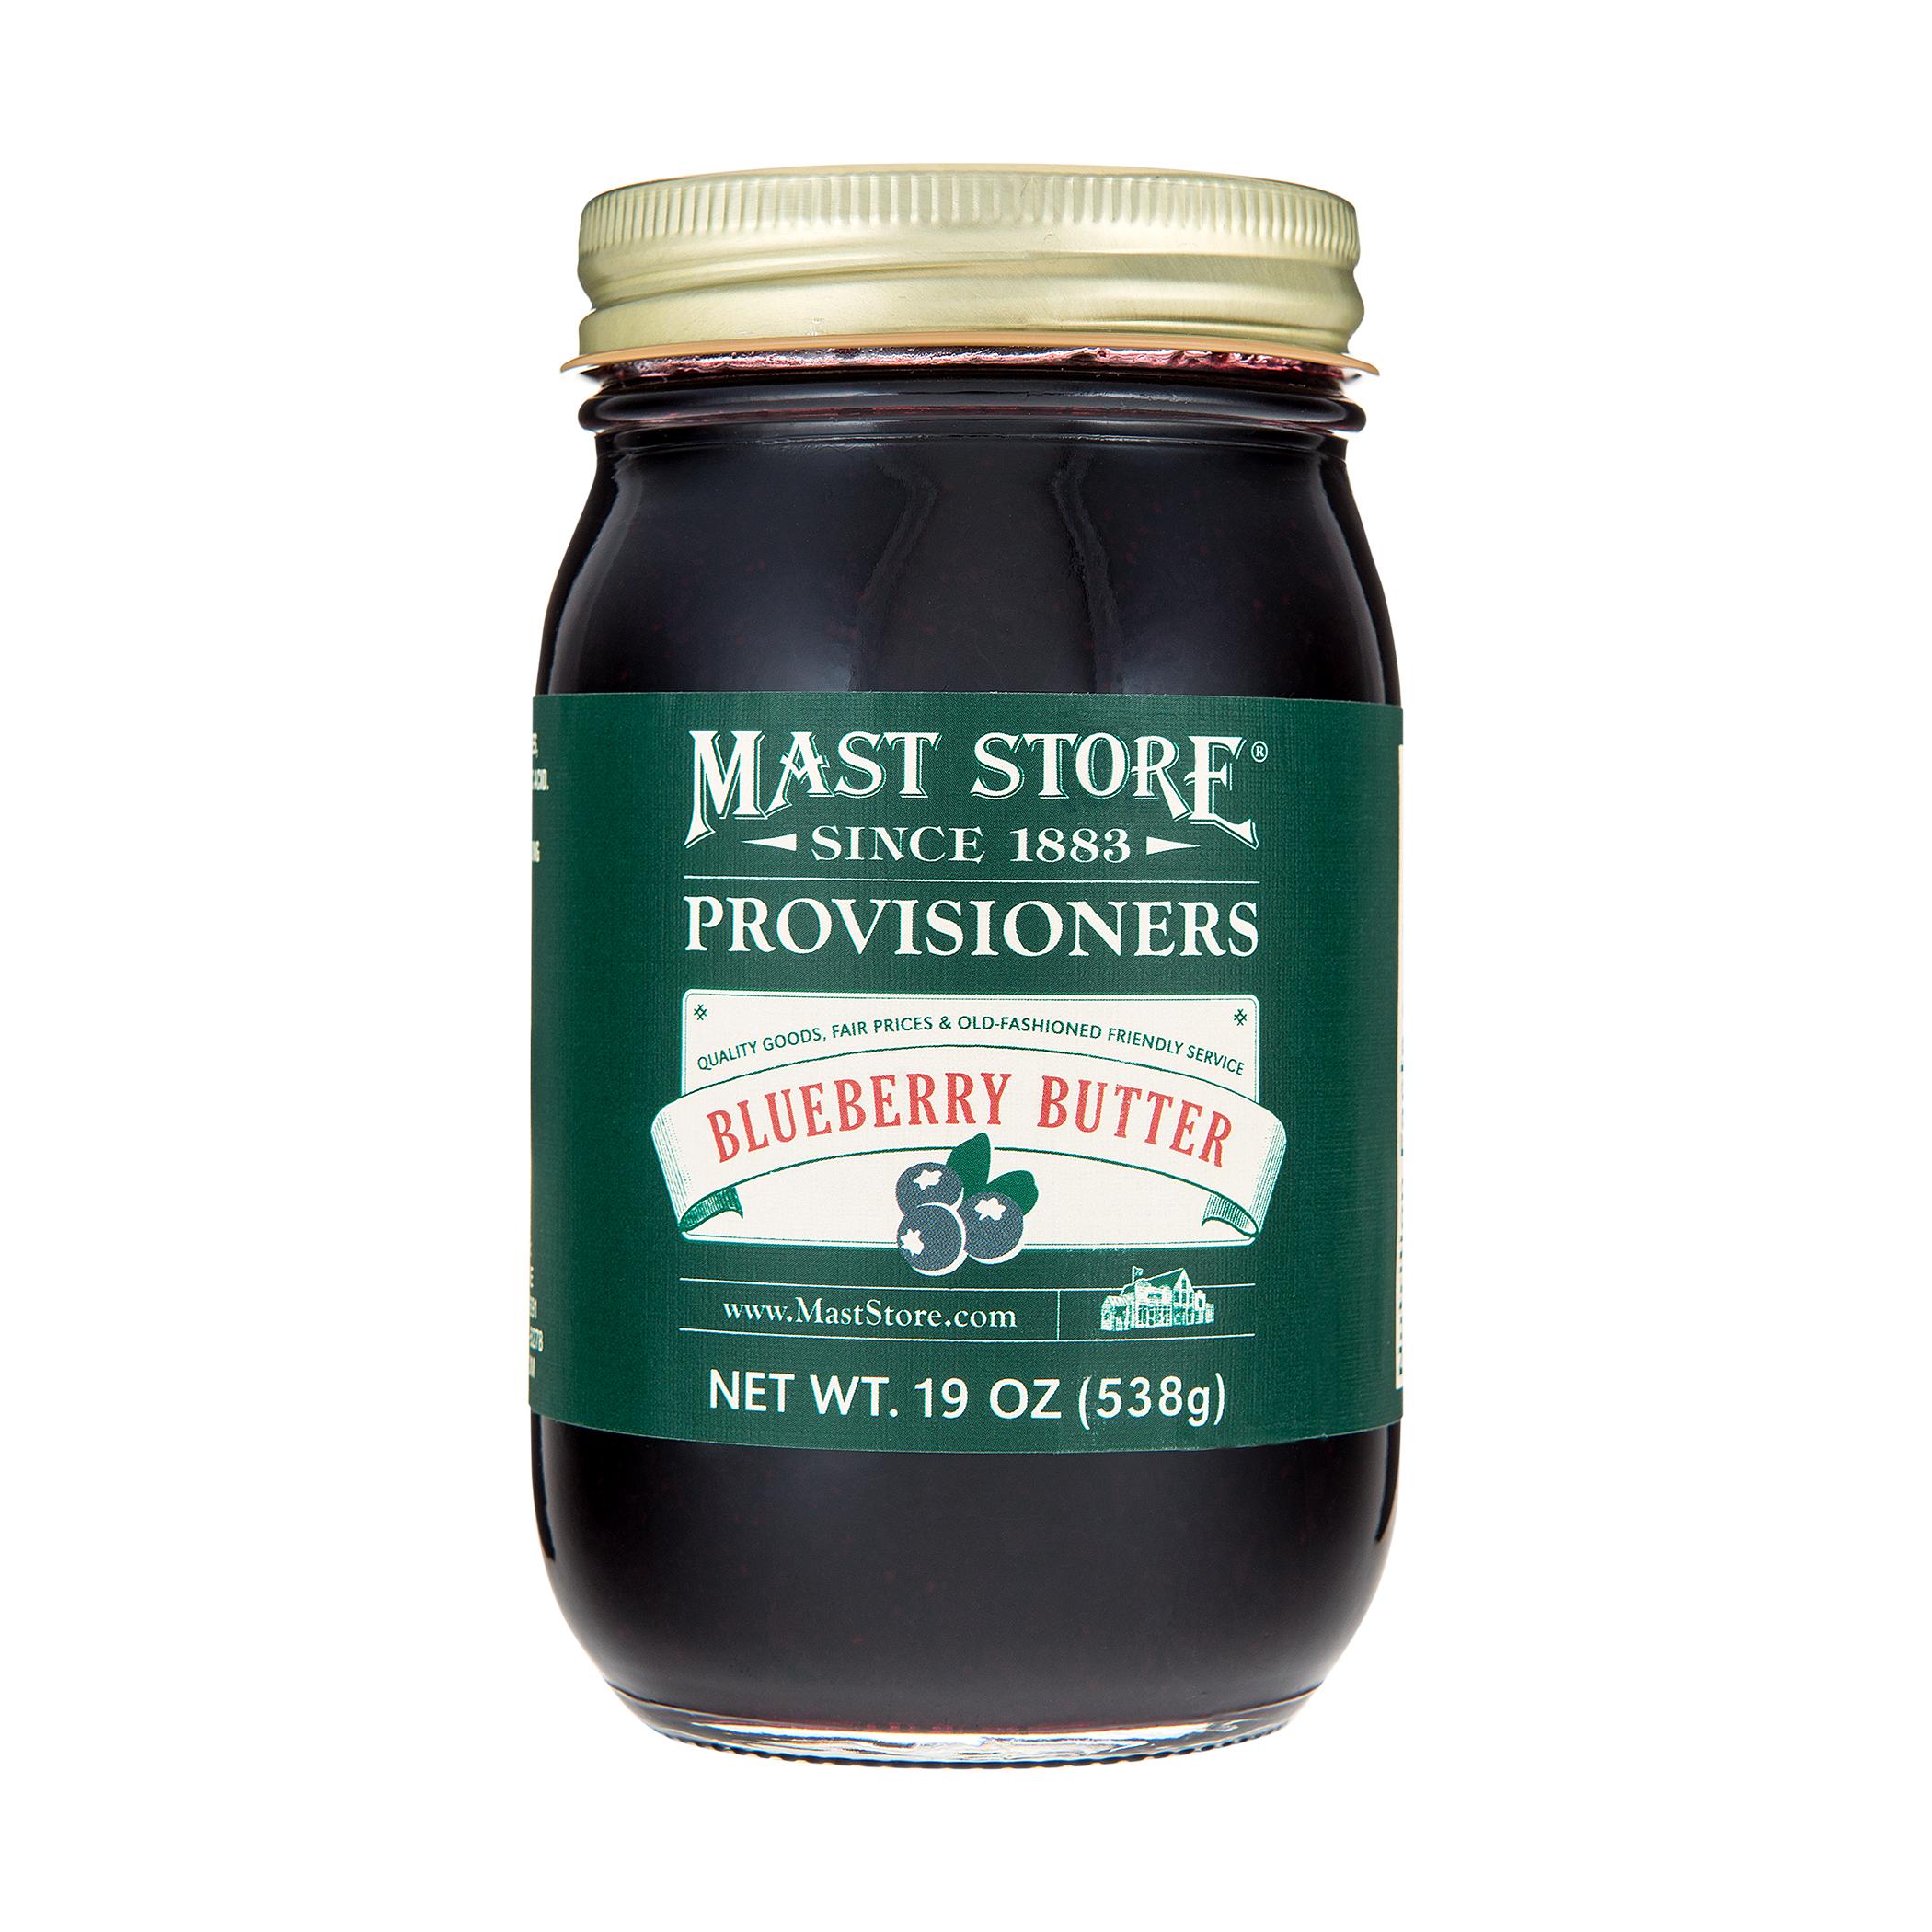  Mast Store Provisioners Blueberry Butter